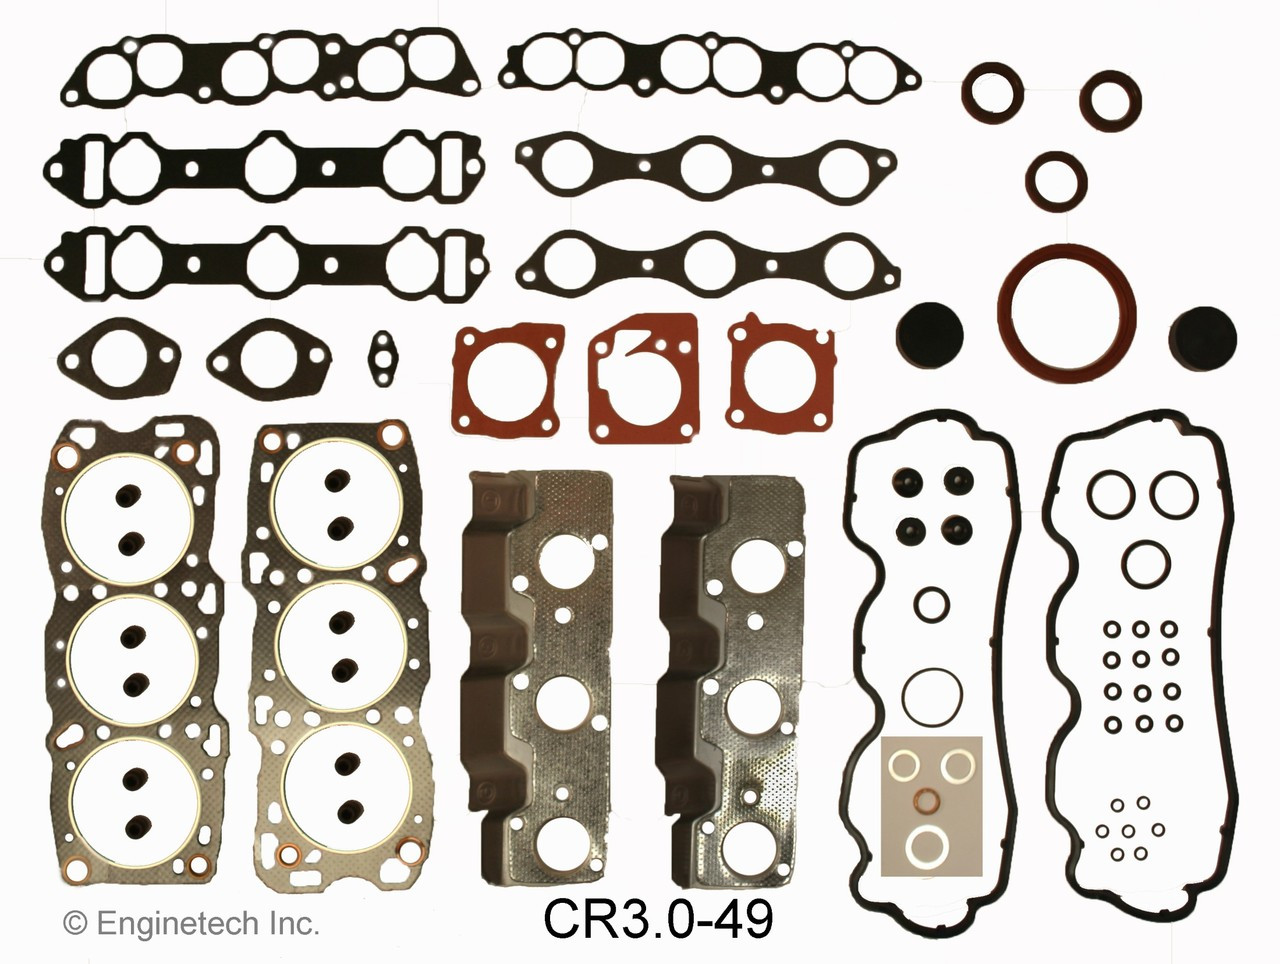 1992 Plymouth Grand Voyager 3.0L Engine Gasket Set CR3.0-49 -48